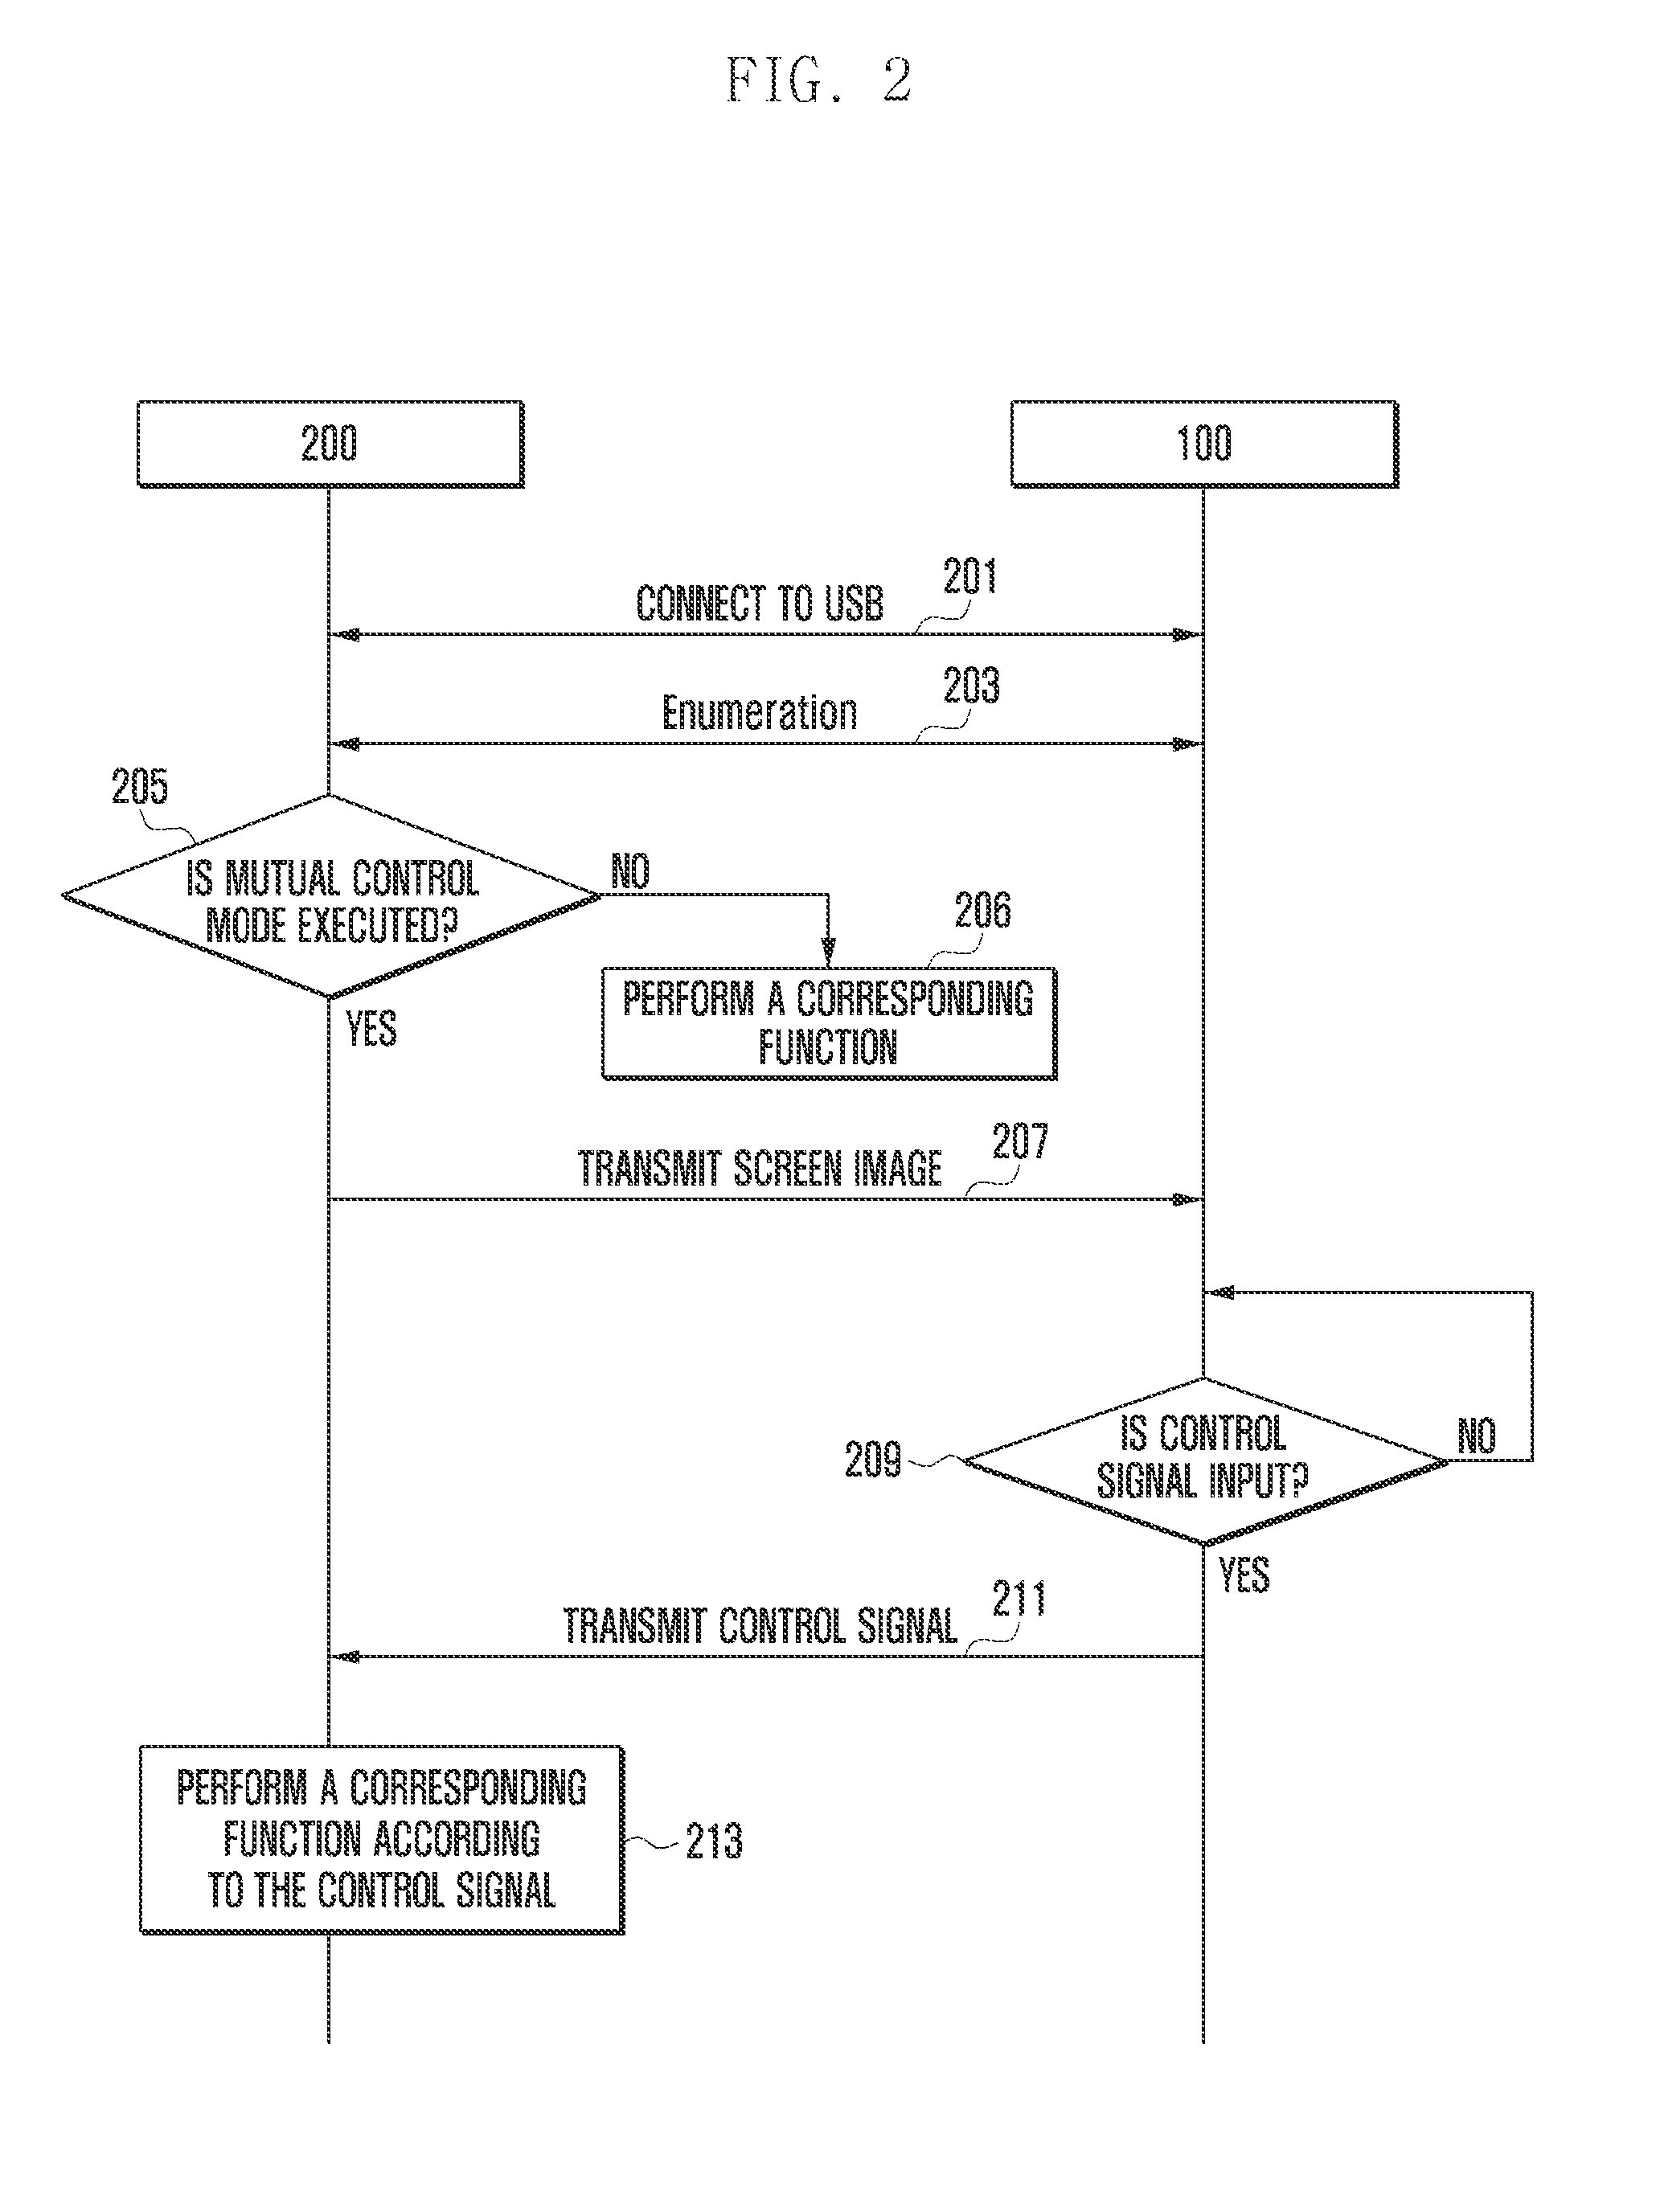 System and method for mutually controlling electronic devices